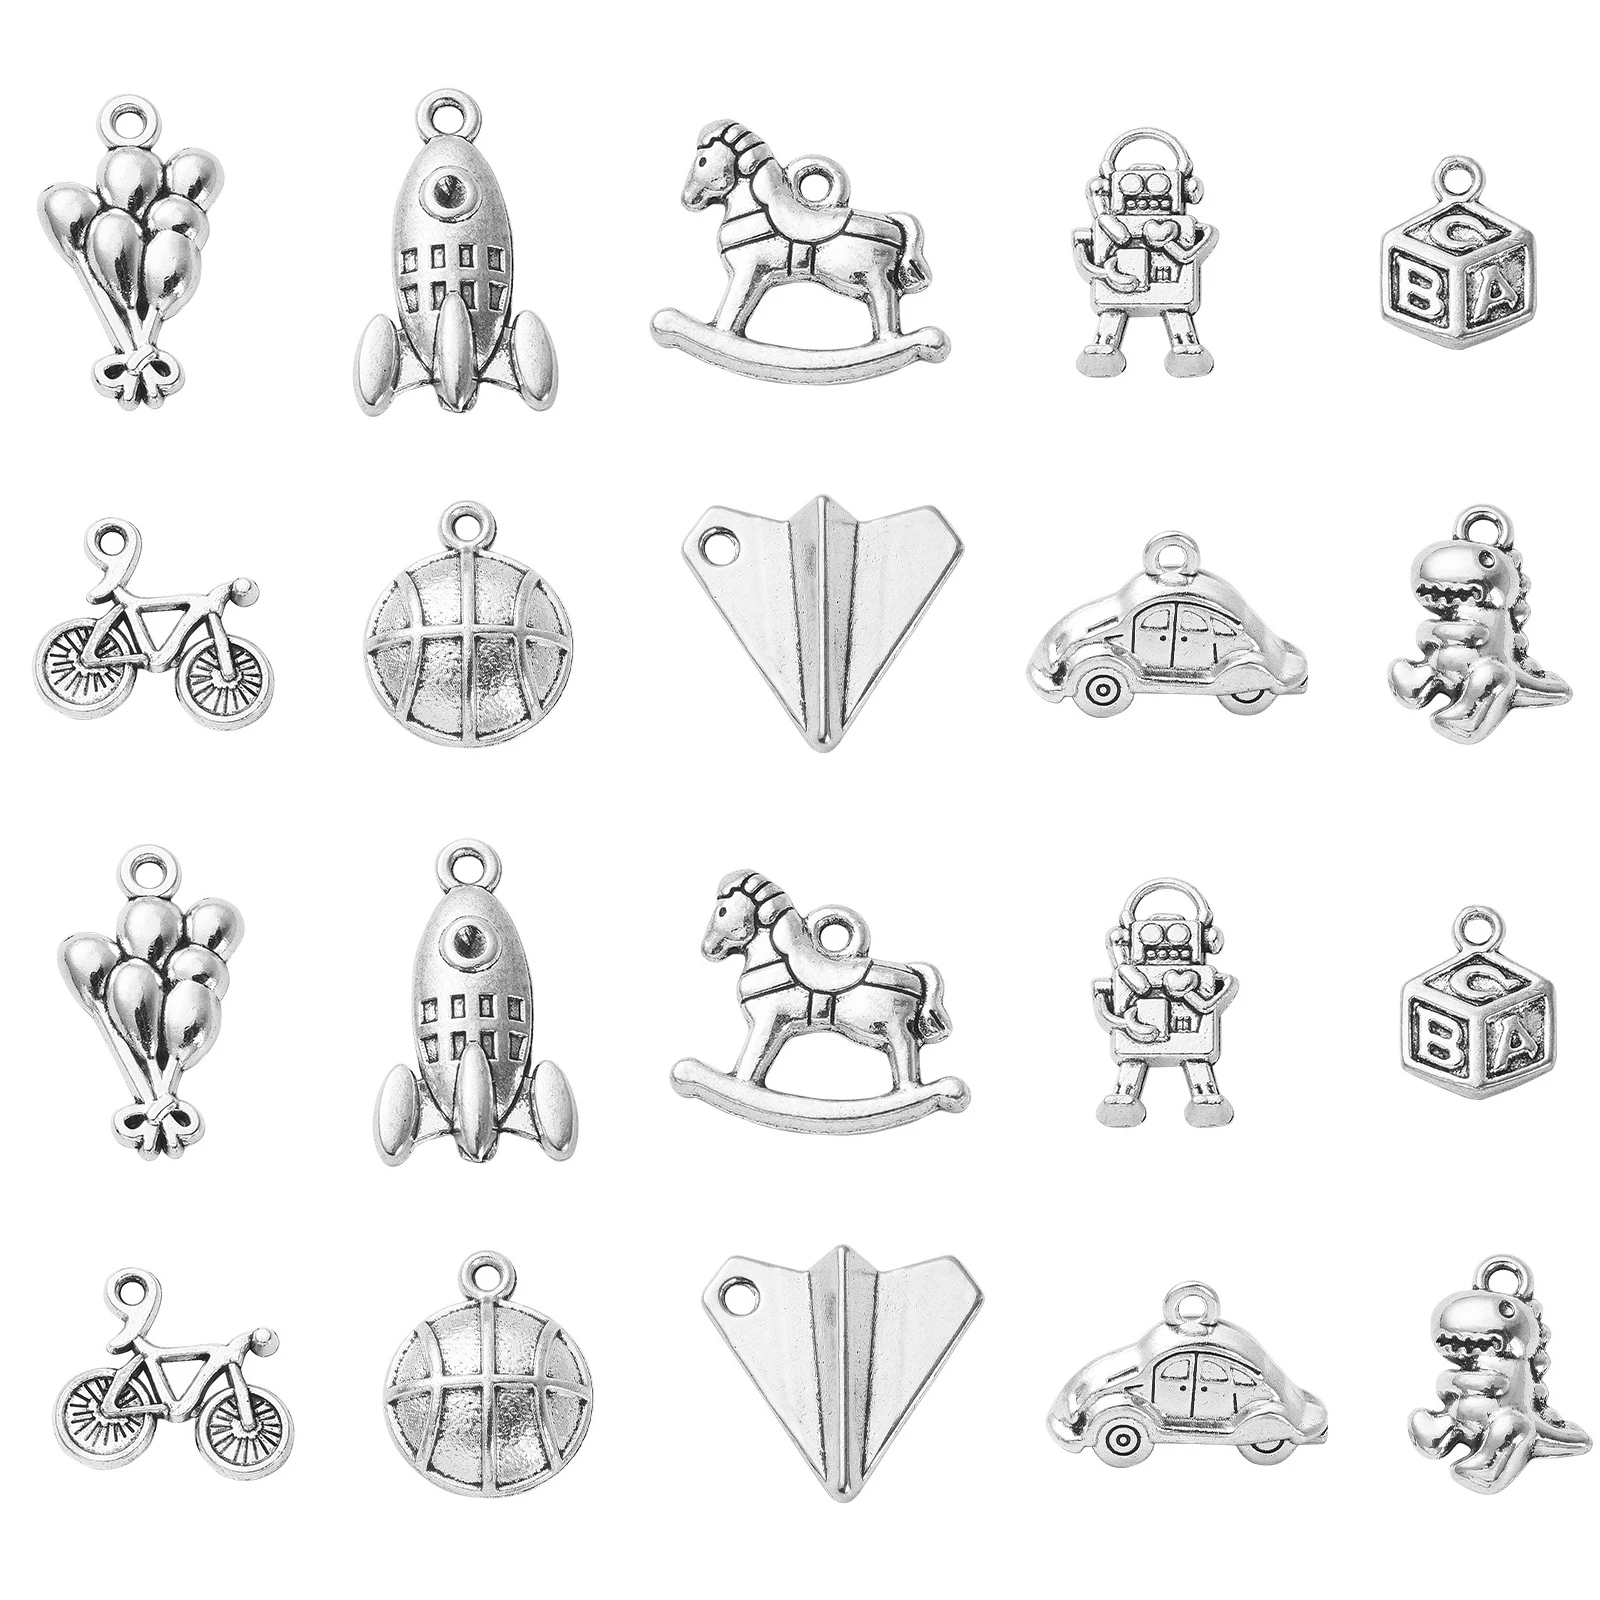 

100Pcs 10 Styles Child Game Charms Baby Theme Charms Tibetan Rocking Horse Balloon Robot Charms for Jewelry Making Bracelets